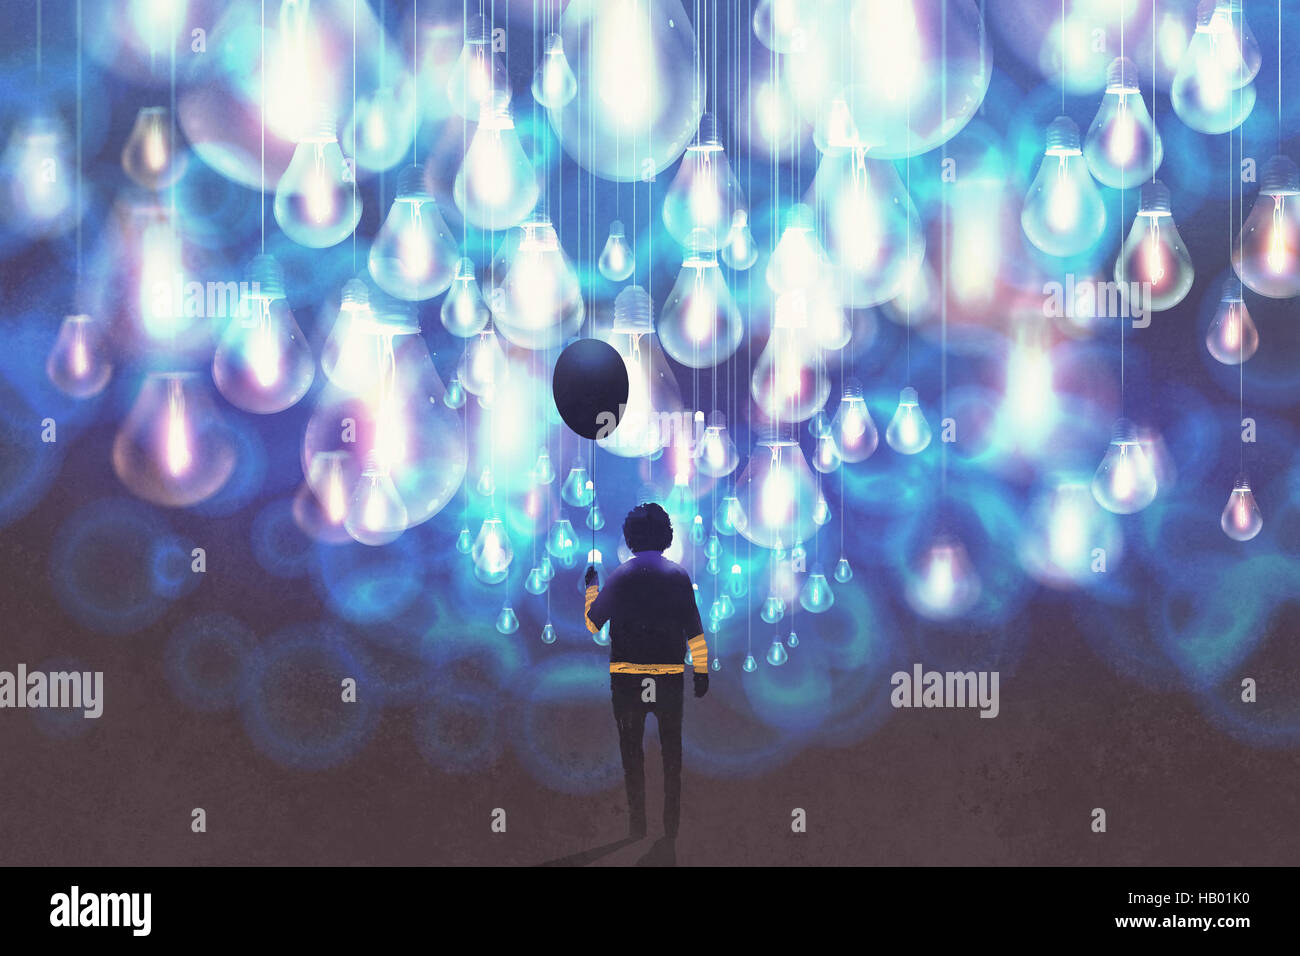 man with black balloon among a lot of glowing blue light bulbs,illustration painting Stock Photo